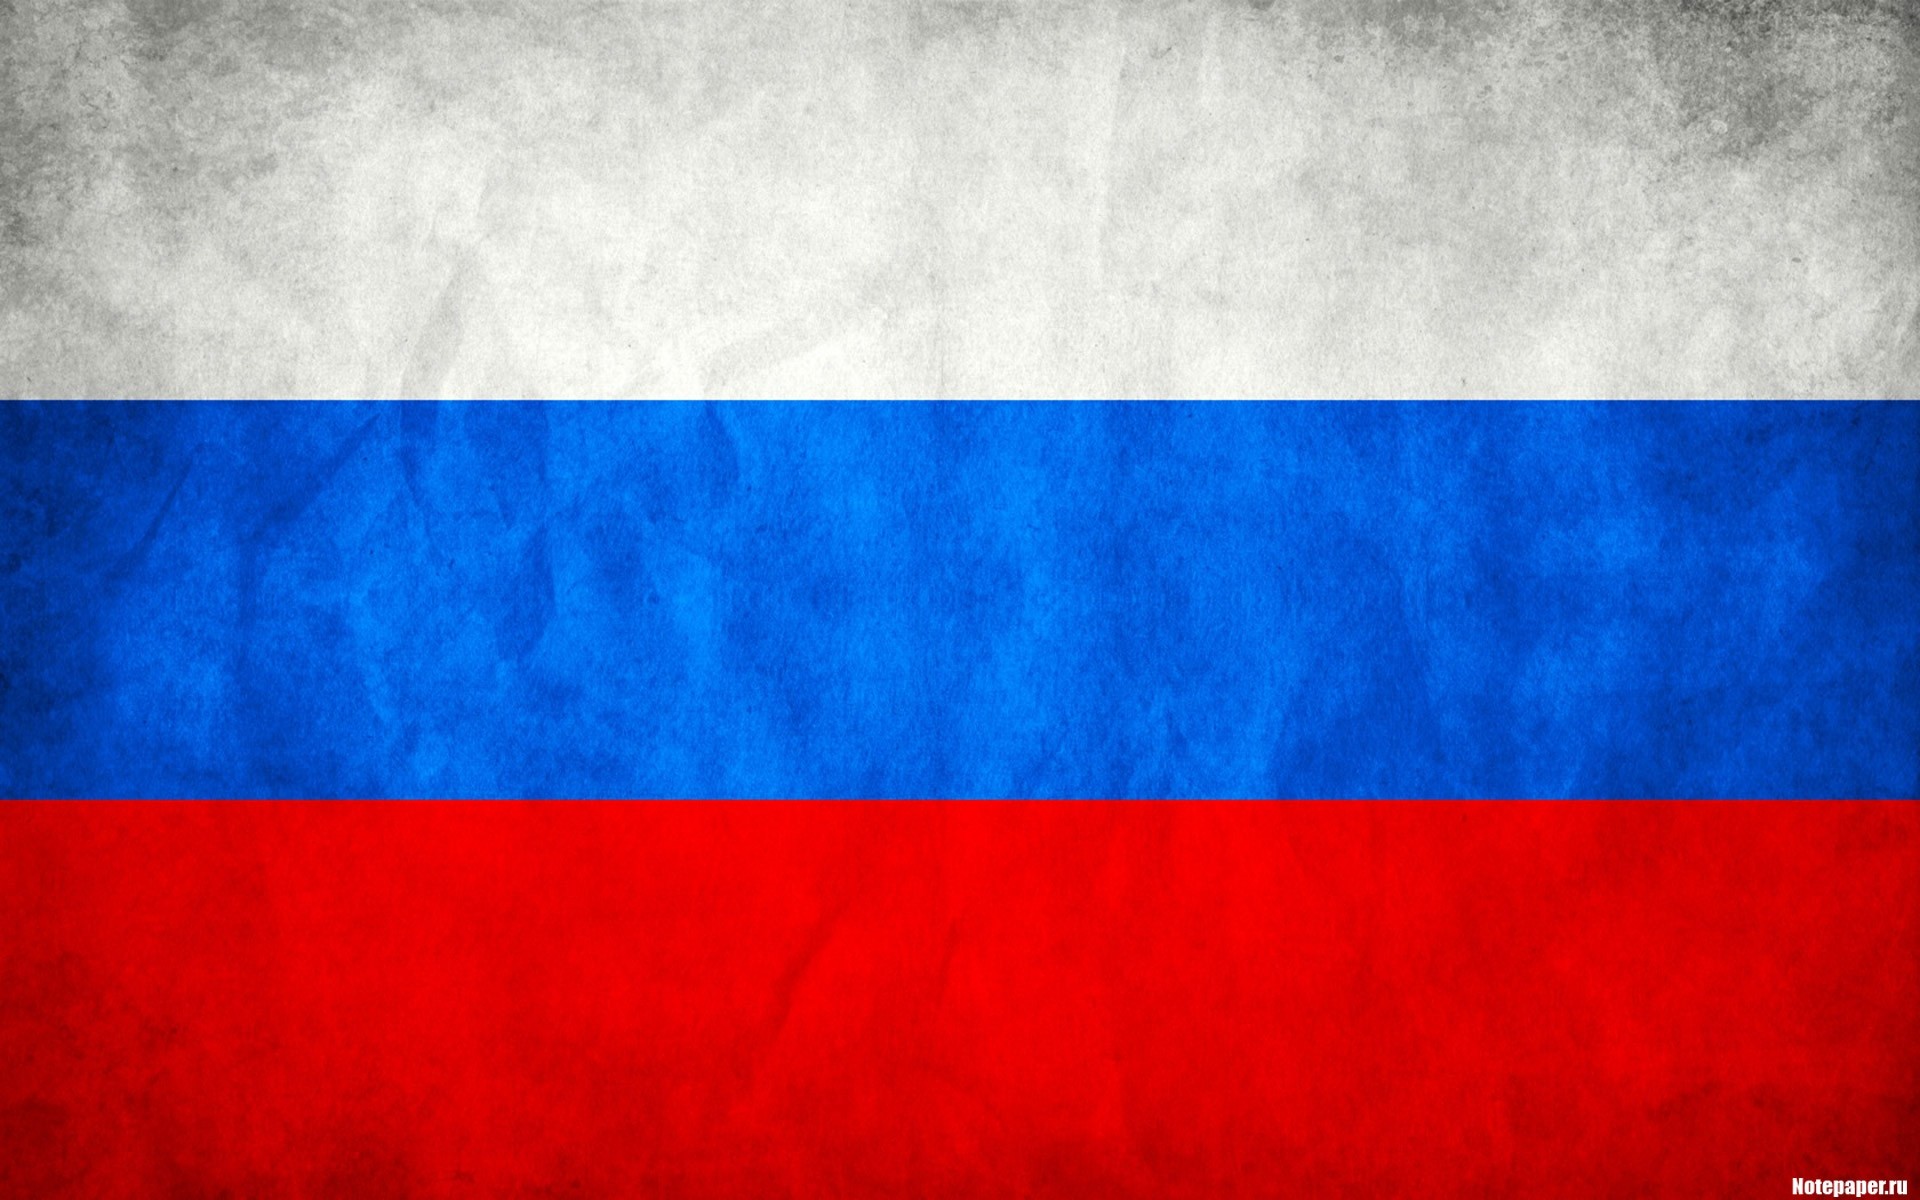 blue, Red, White, Russia, Flags, Russian, Federation, Russian, Flags Wallpaper